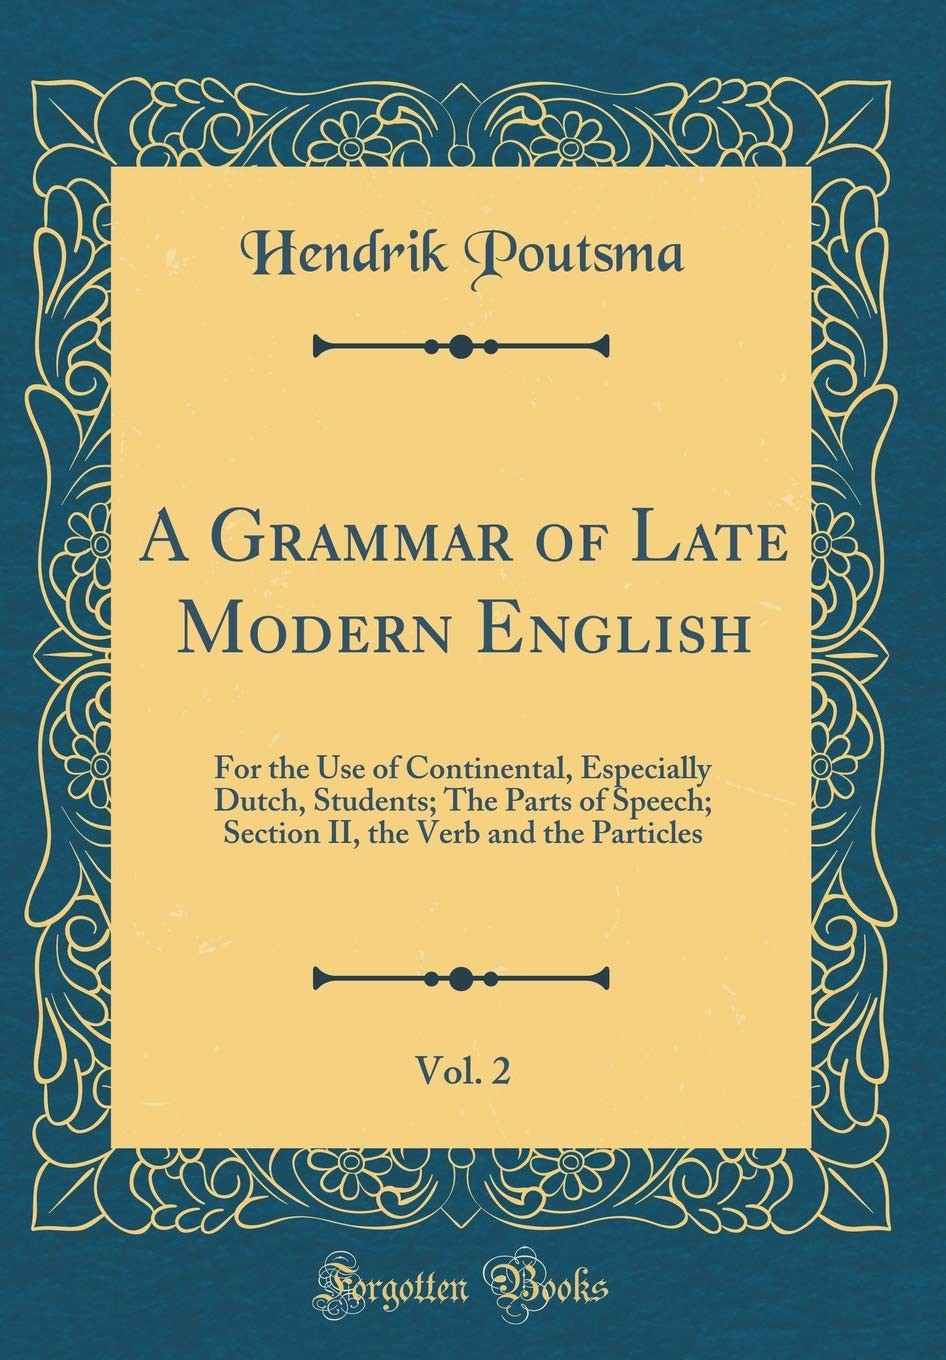 A Grammar of Late Modern English - Part 2 - The Parts of Speech - Section 1, A